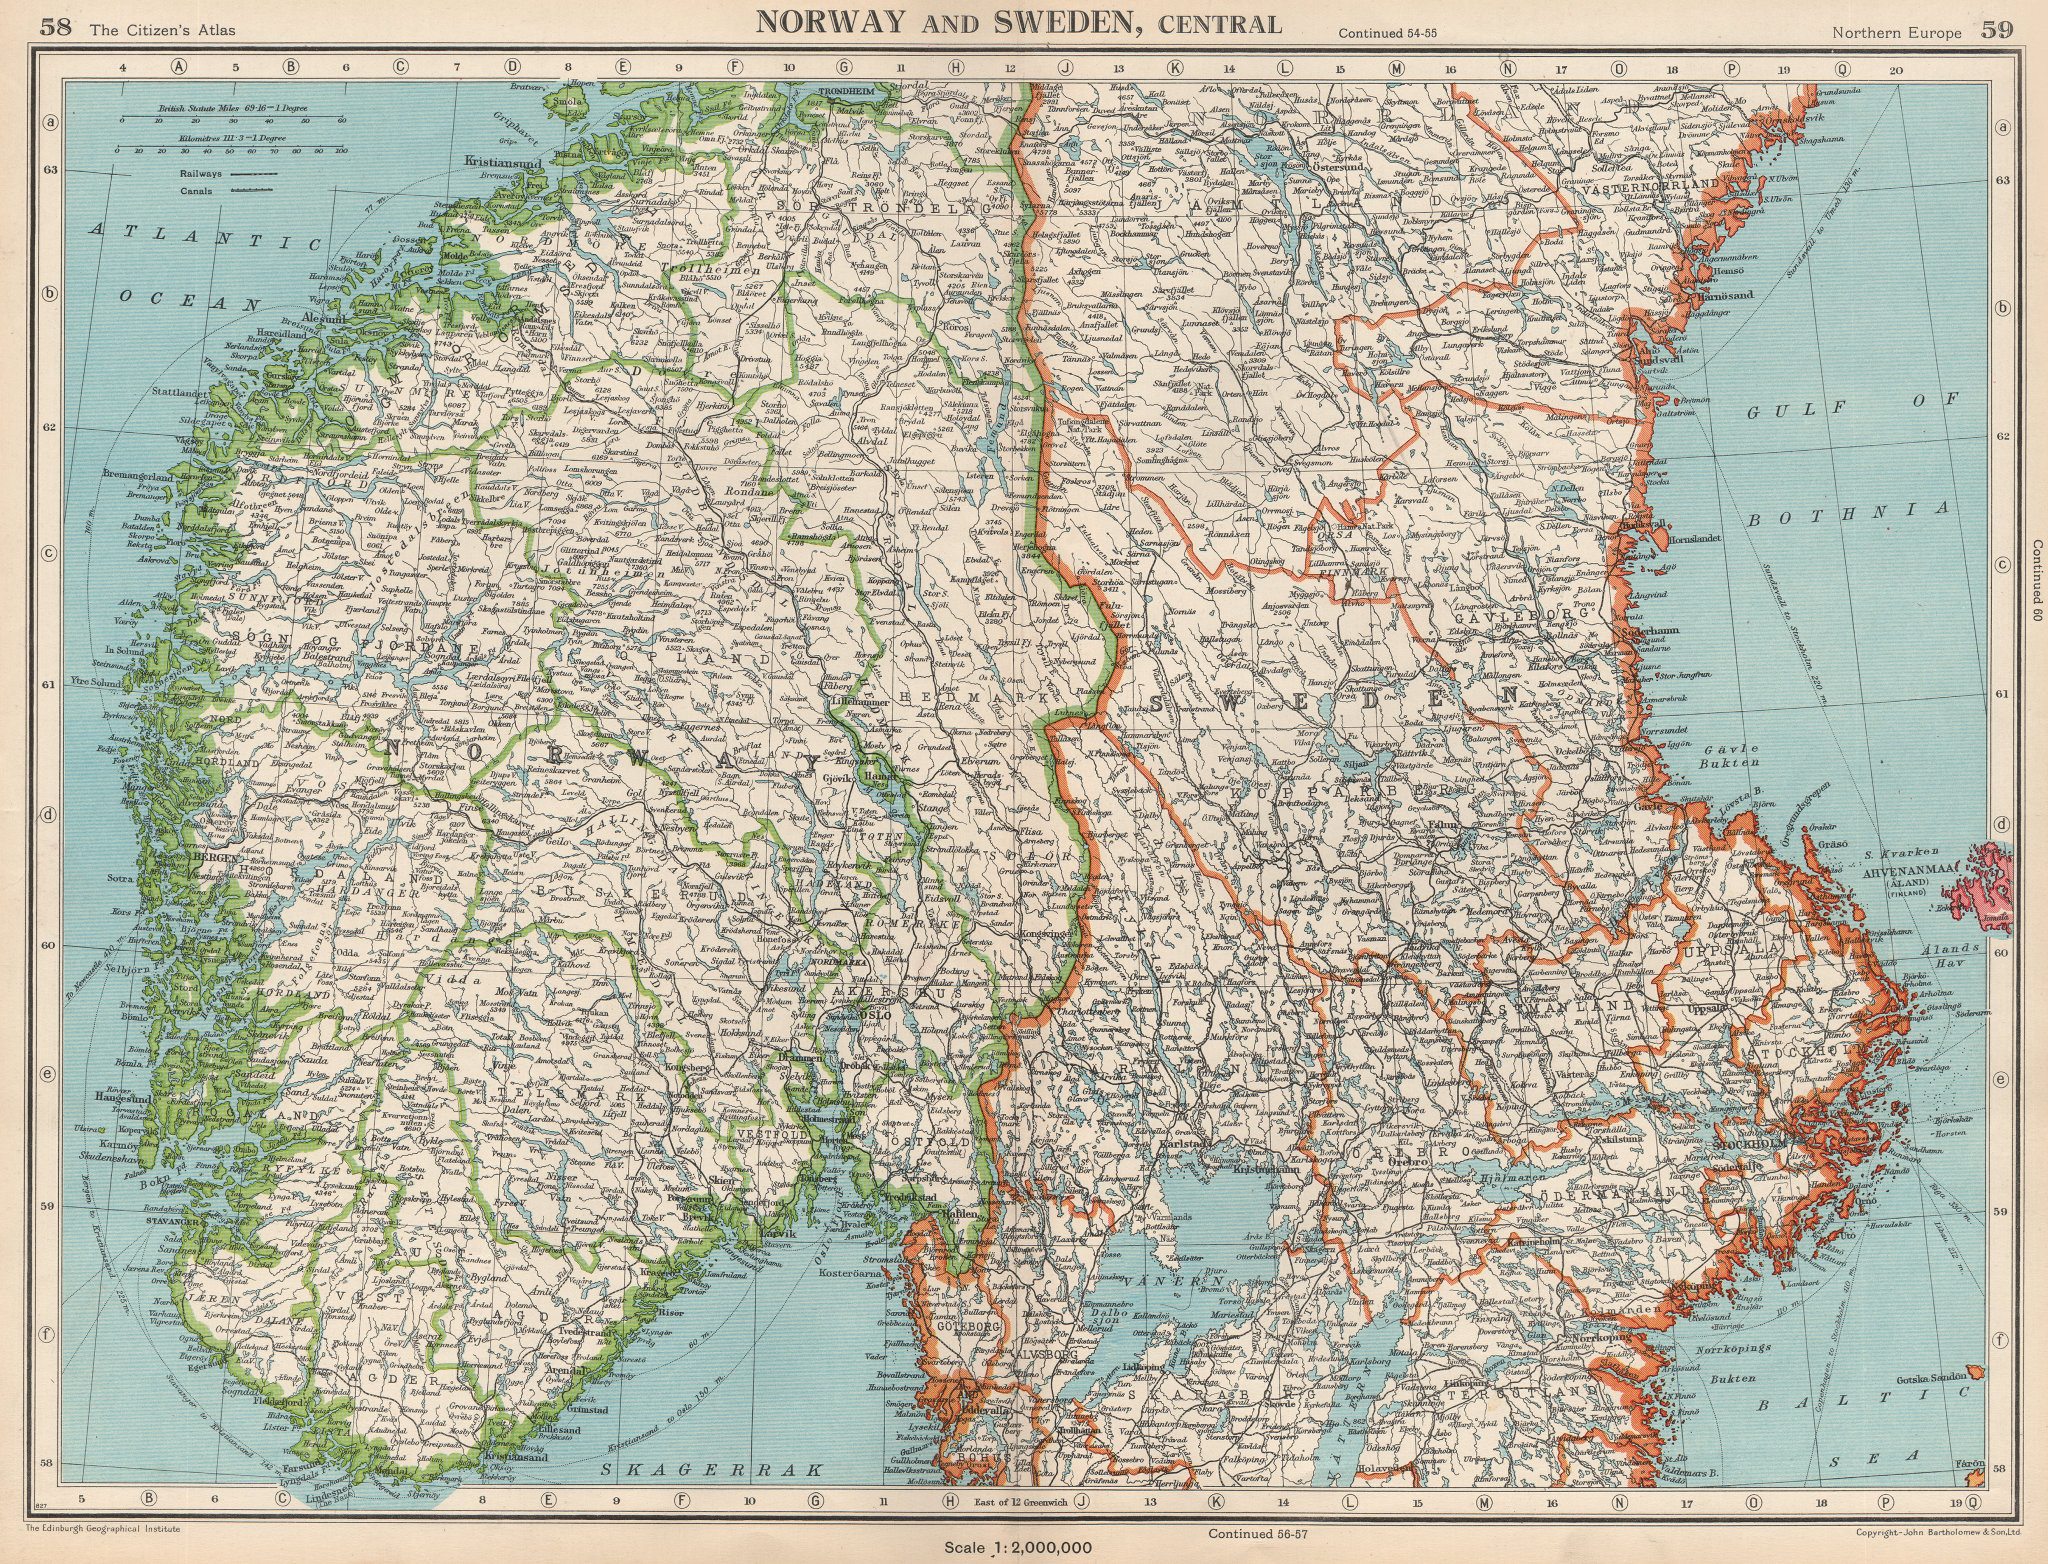 Associate Product SCANDINAVIA. Norway and Sweden, Central. Railways. BARTHOLOMEW 1952 old map